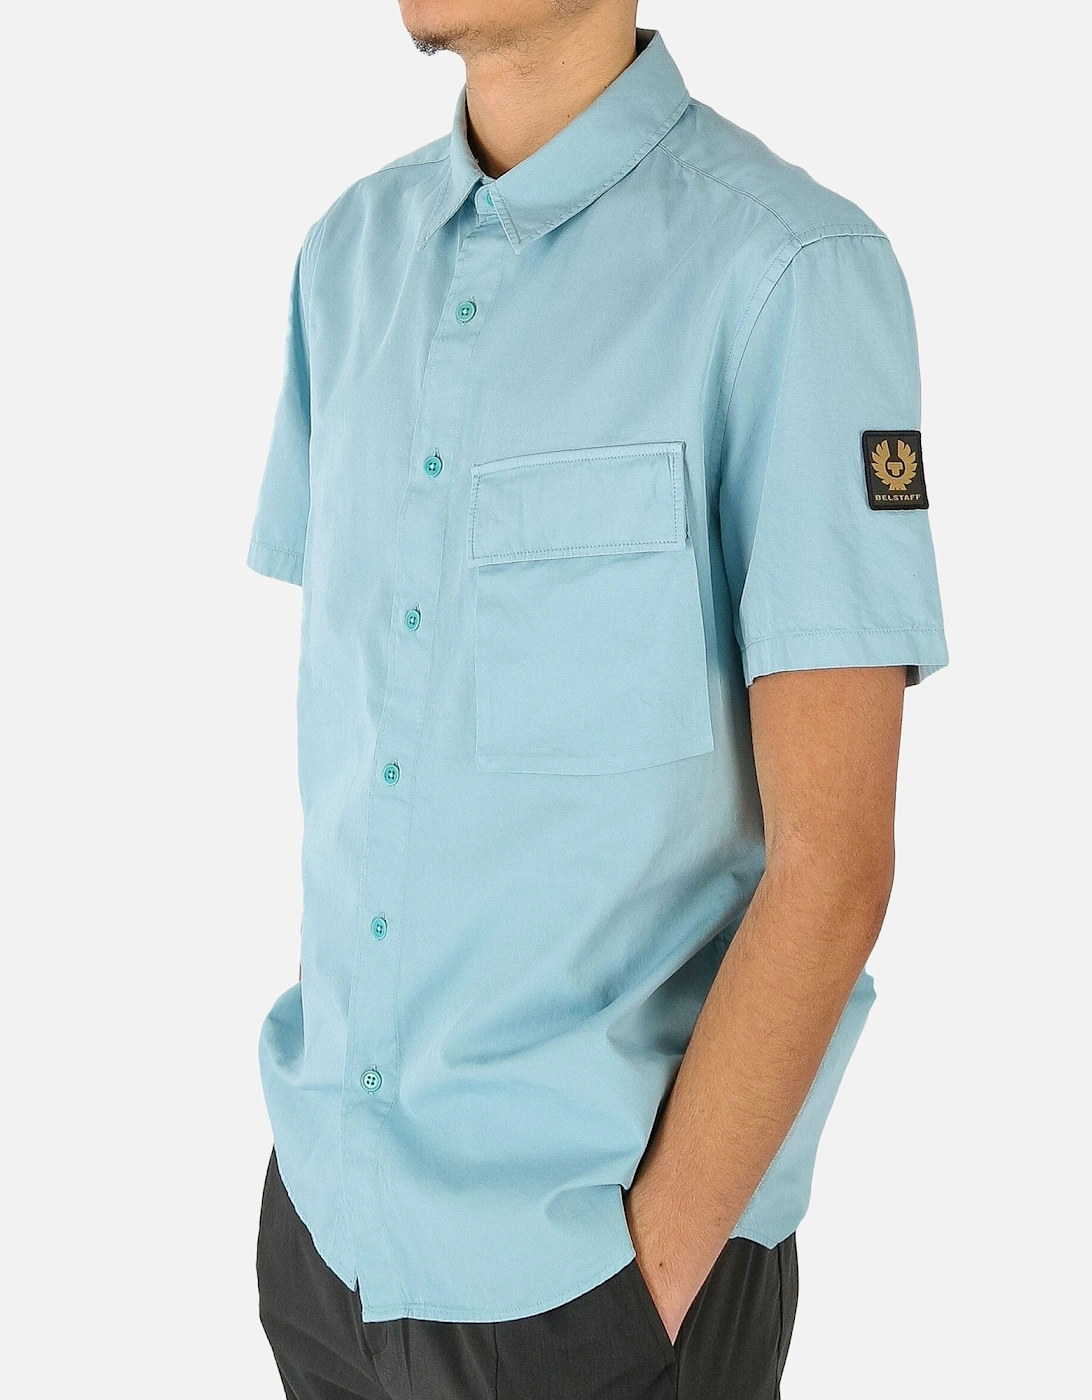 Scale SS Chest Pocket Blue Shirt